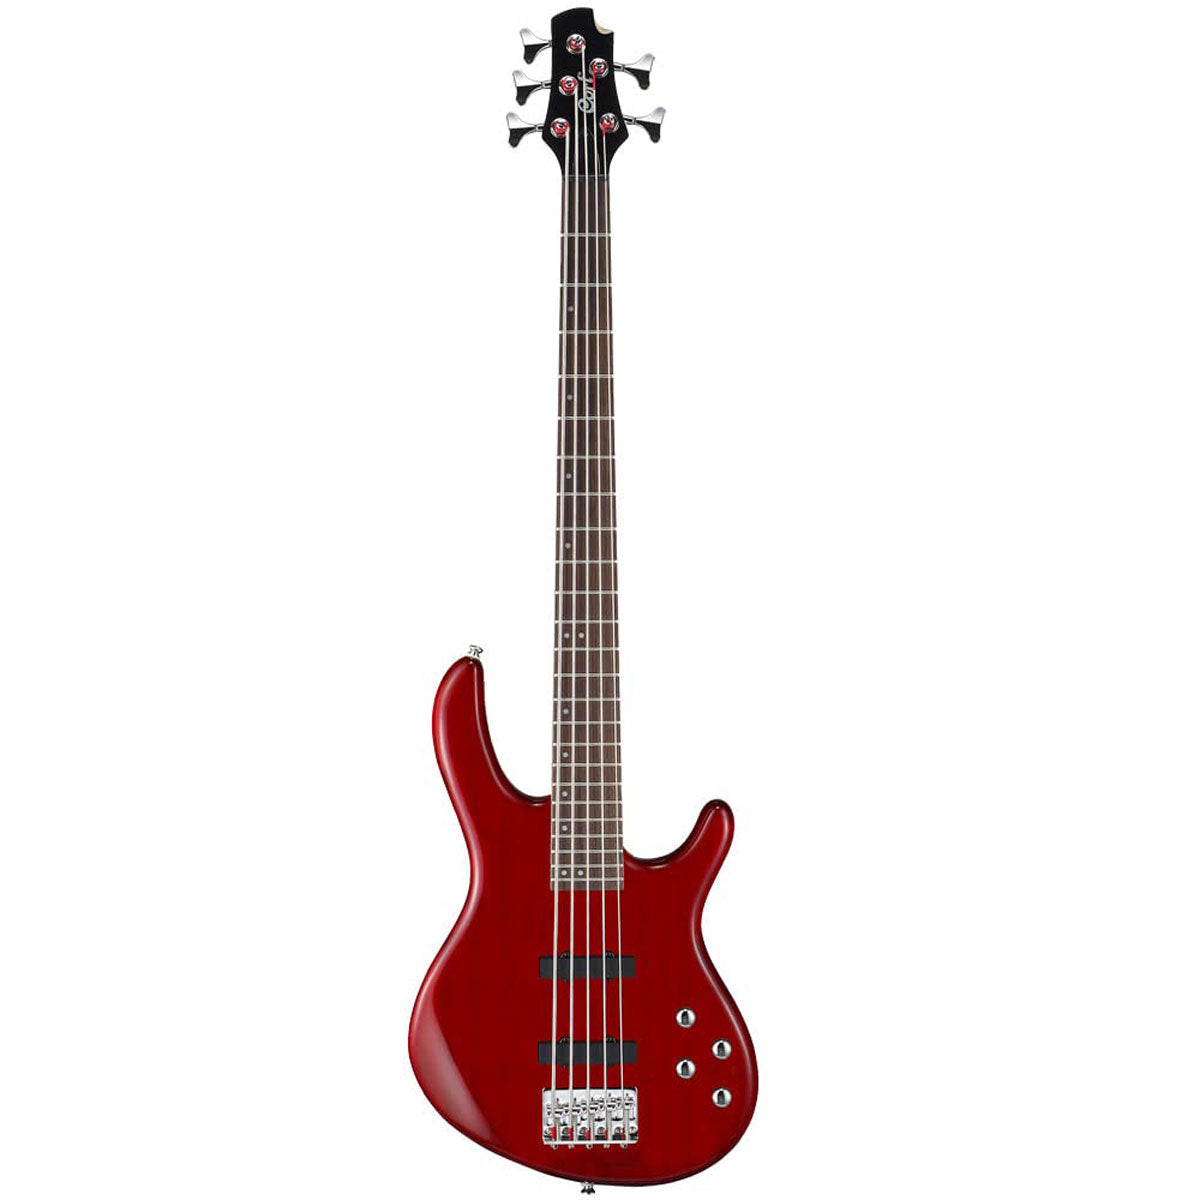 Cort Action Bass V Plus 5-String Bass Guitar - Trans Red